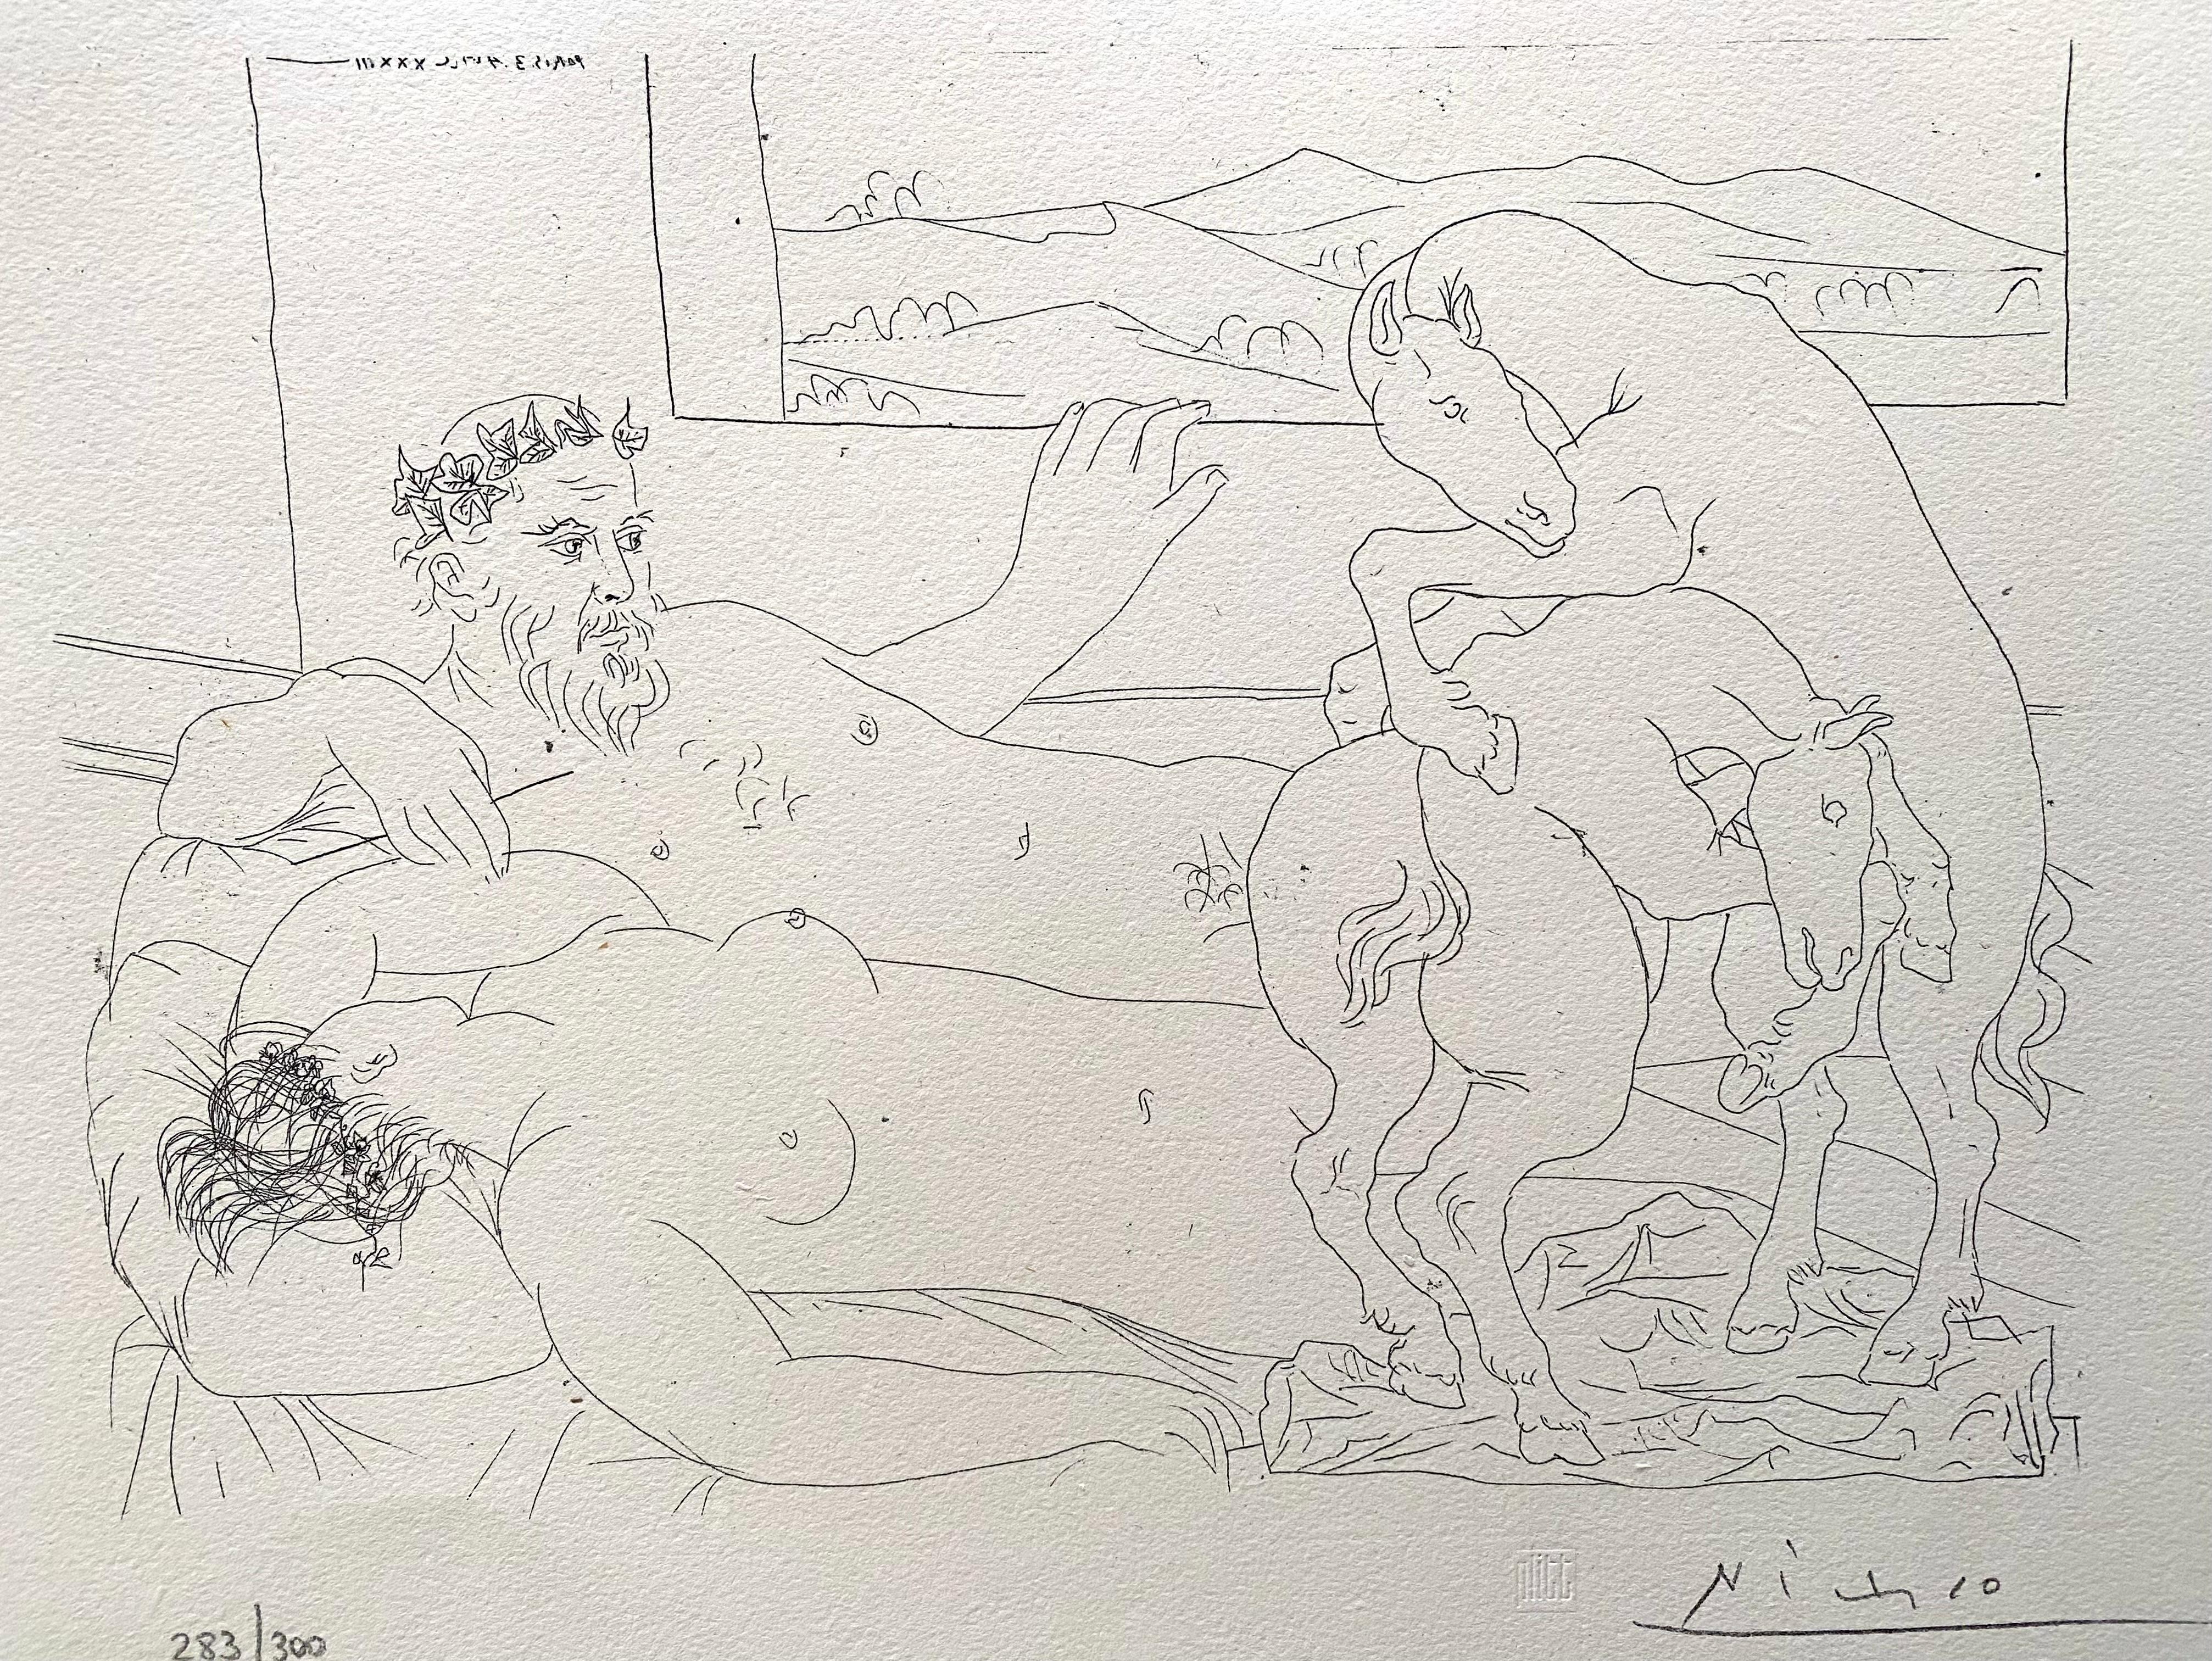 
Description: Pablo Picasso created the Suite Vollard between 1930 and 1939 in honor of his friend and art dealer, Ambroise Vollard. The suite is comprised of 100 etchings, illustrating Picasso's most famous themes. In 1990, the Picasso family